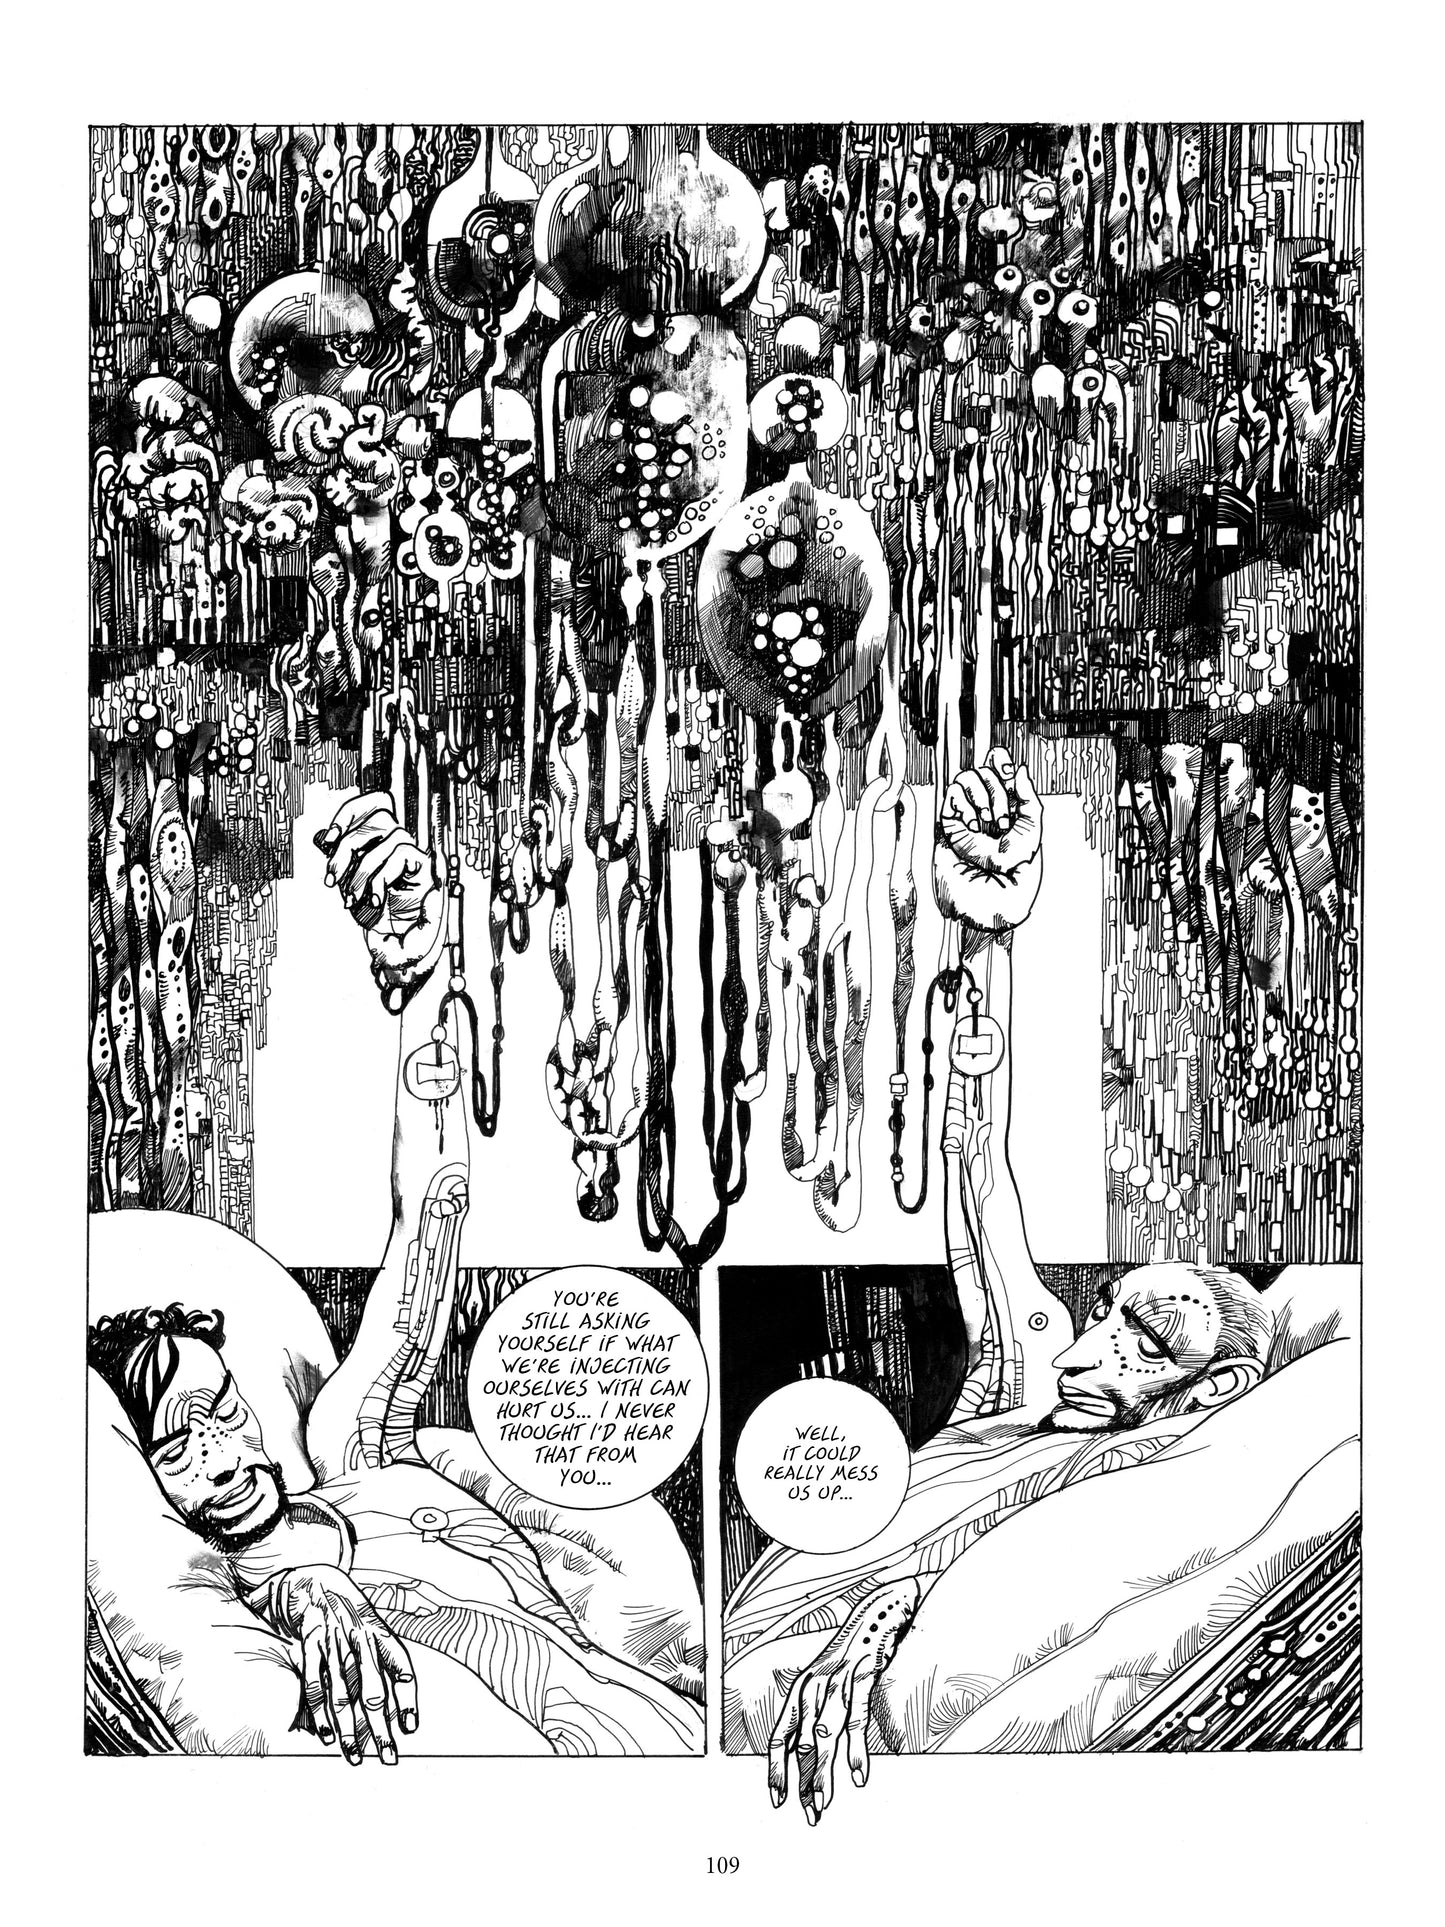 THE COLLECTED TOPPI vol. 10: Future Perfect, by Sergio Toppi